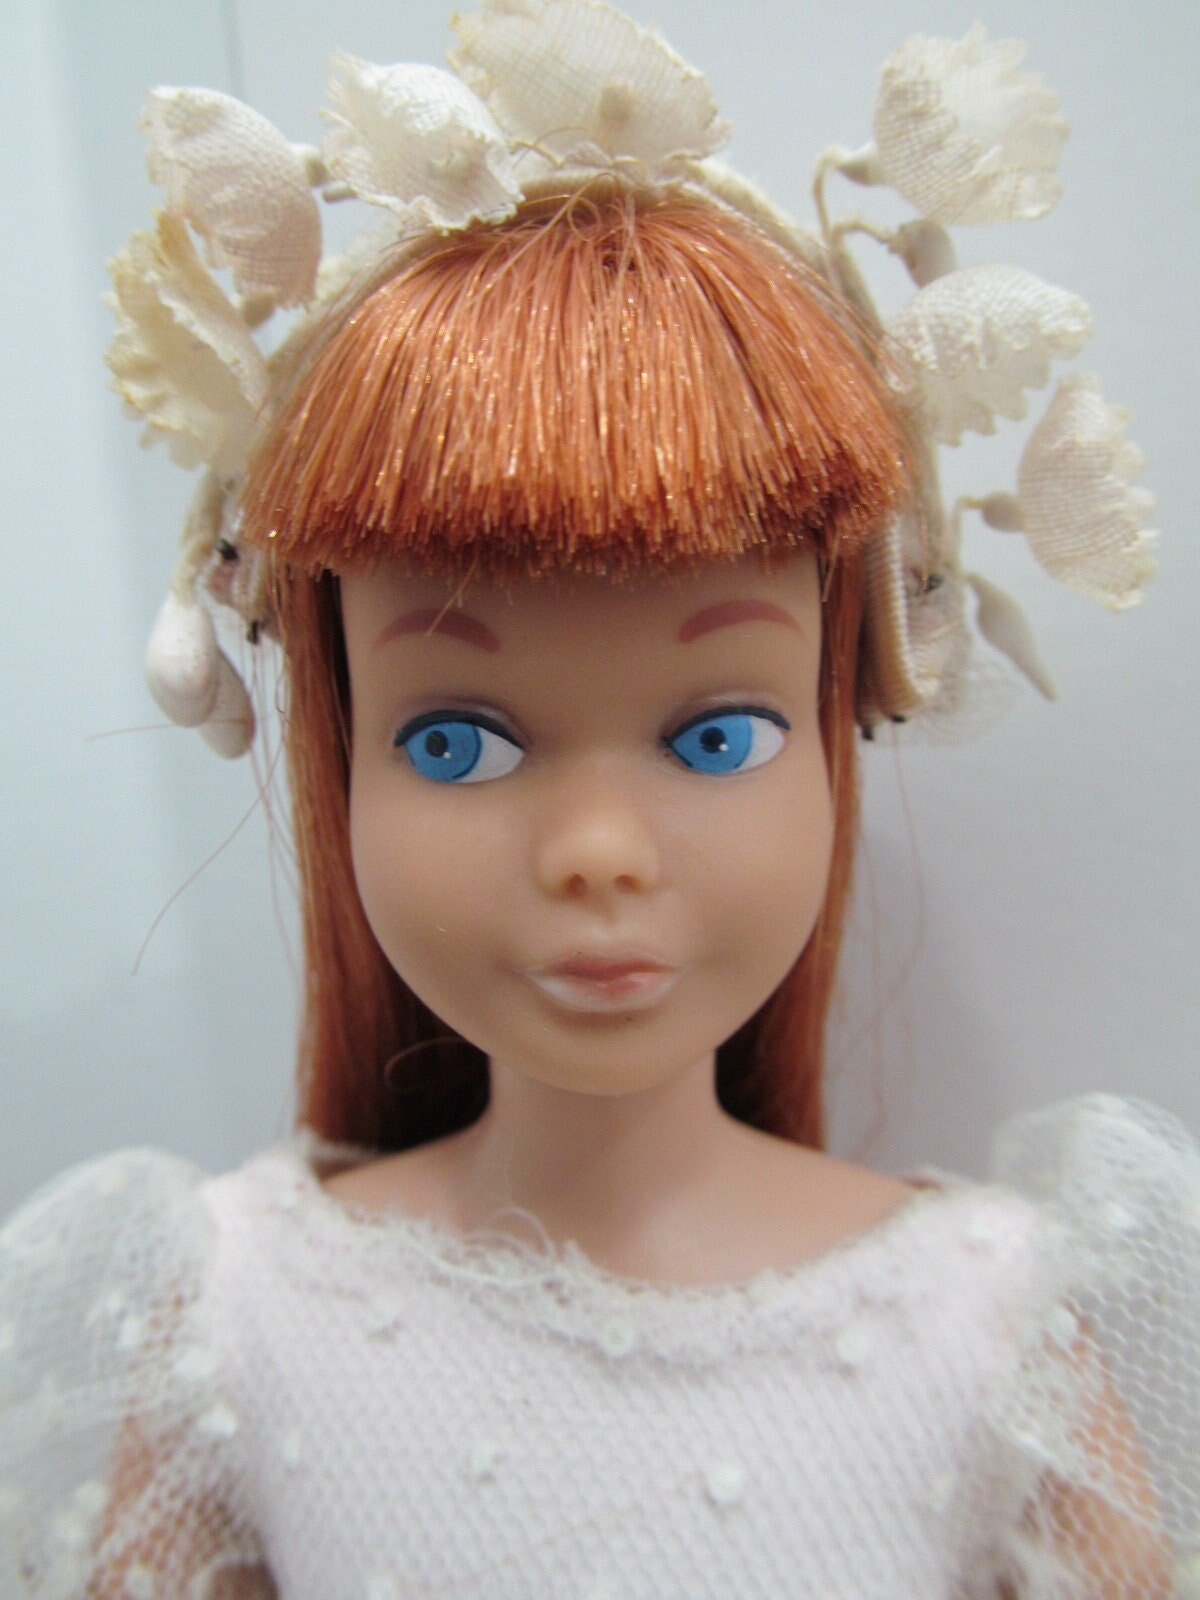 Barbie*Skipper Western-style clothes [Chill Chasers]1966 year  #1926*Vintage*NRFB: Real Yahoo auction salling